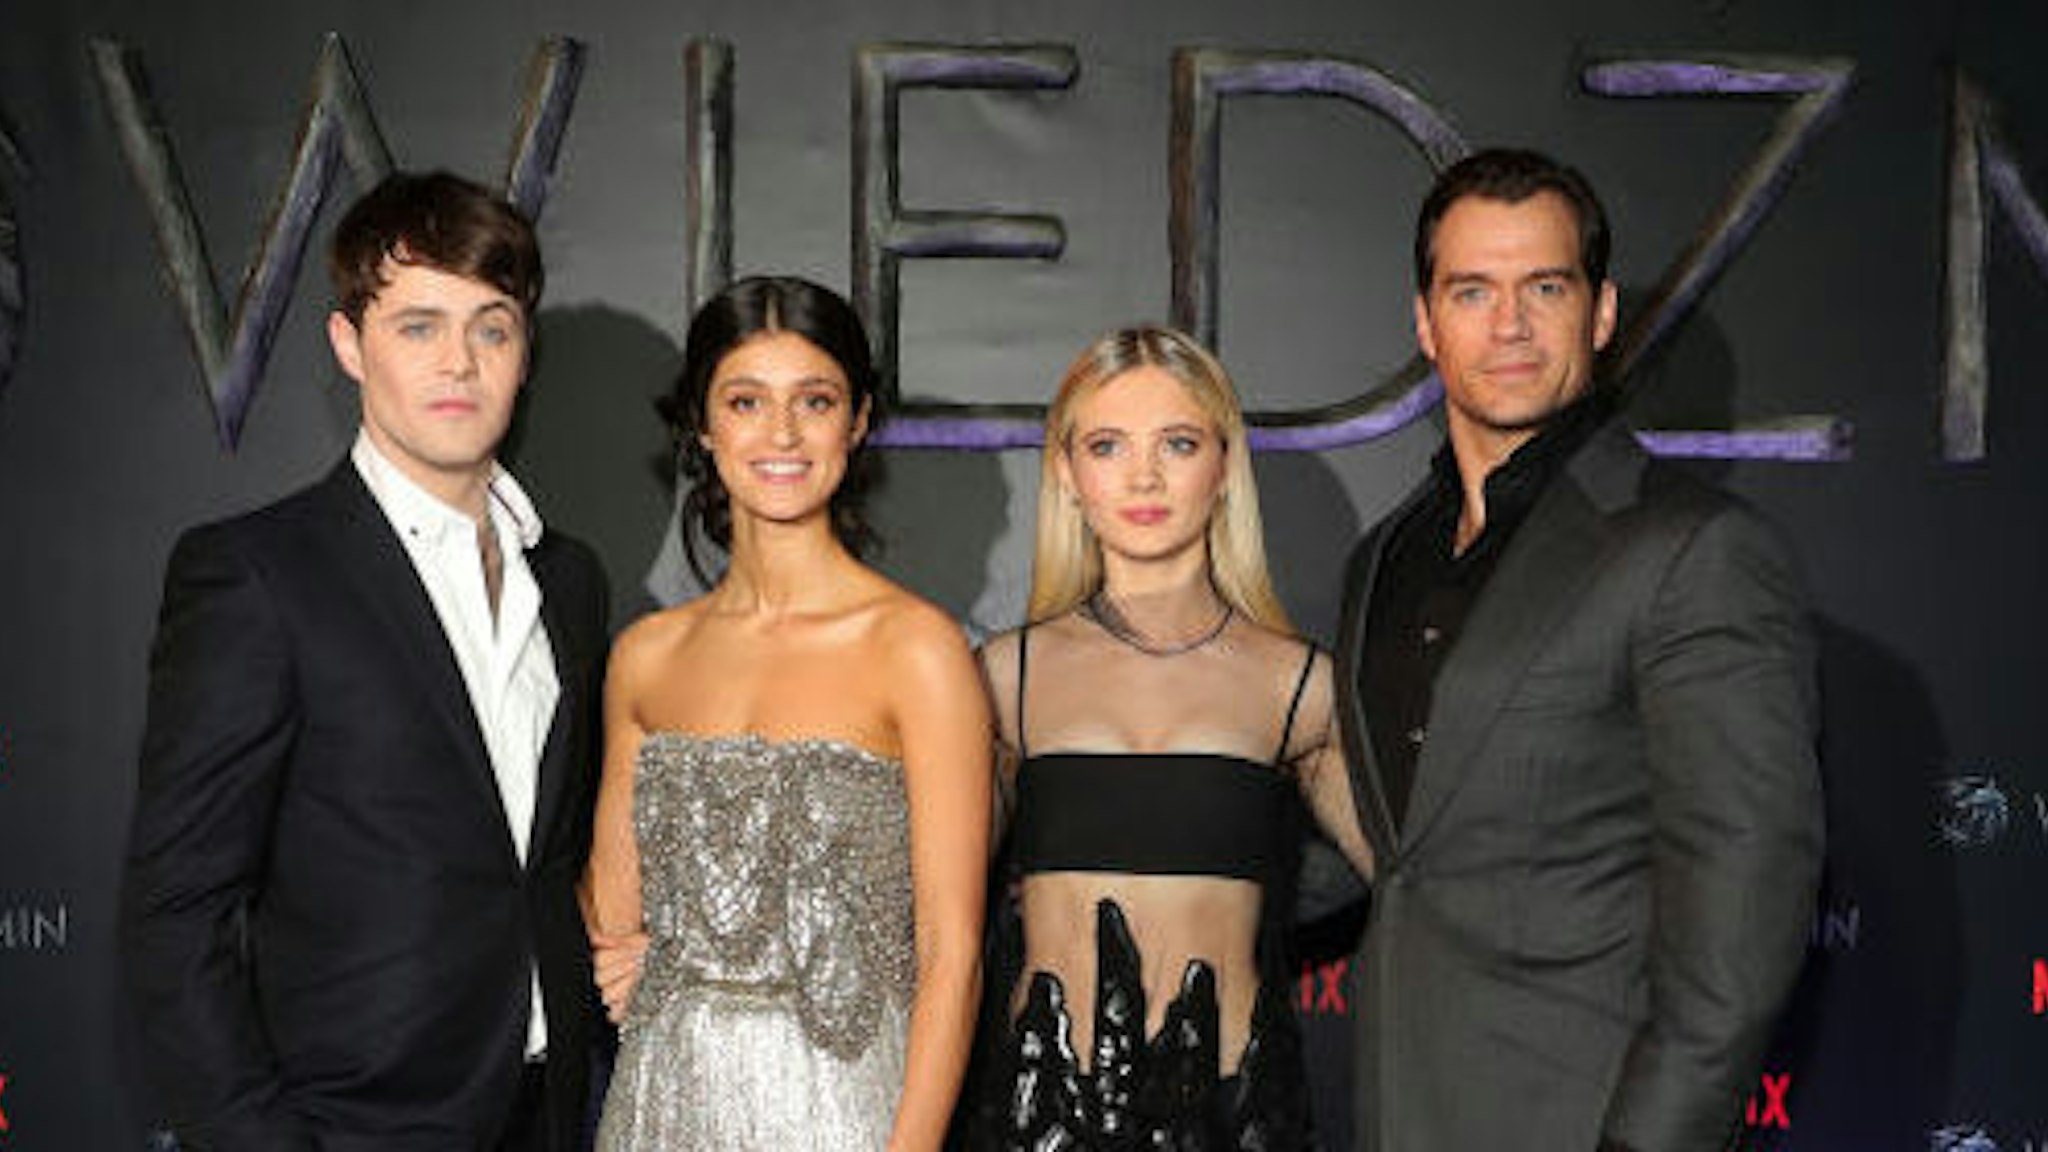 Joey Batey, Anya Chalotra, Freya Allan and Henry Cavill attend the premiere of the Netflix series "The Witcher" (Wiedzmin) on December 18, 2019 in Warsaw, Poland. (Photo by Andreas Rentz/Getty Images for Netflix)